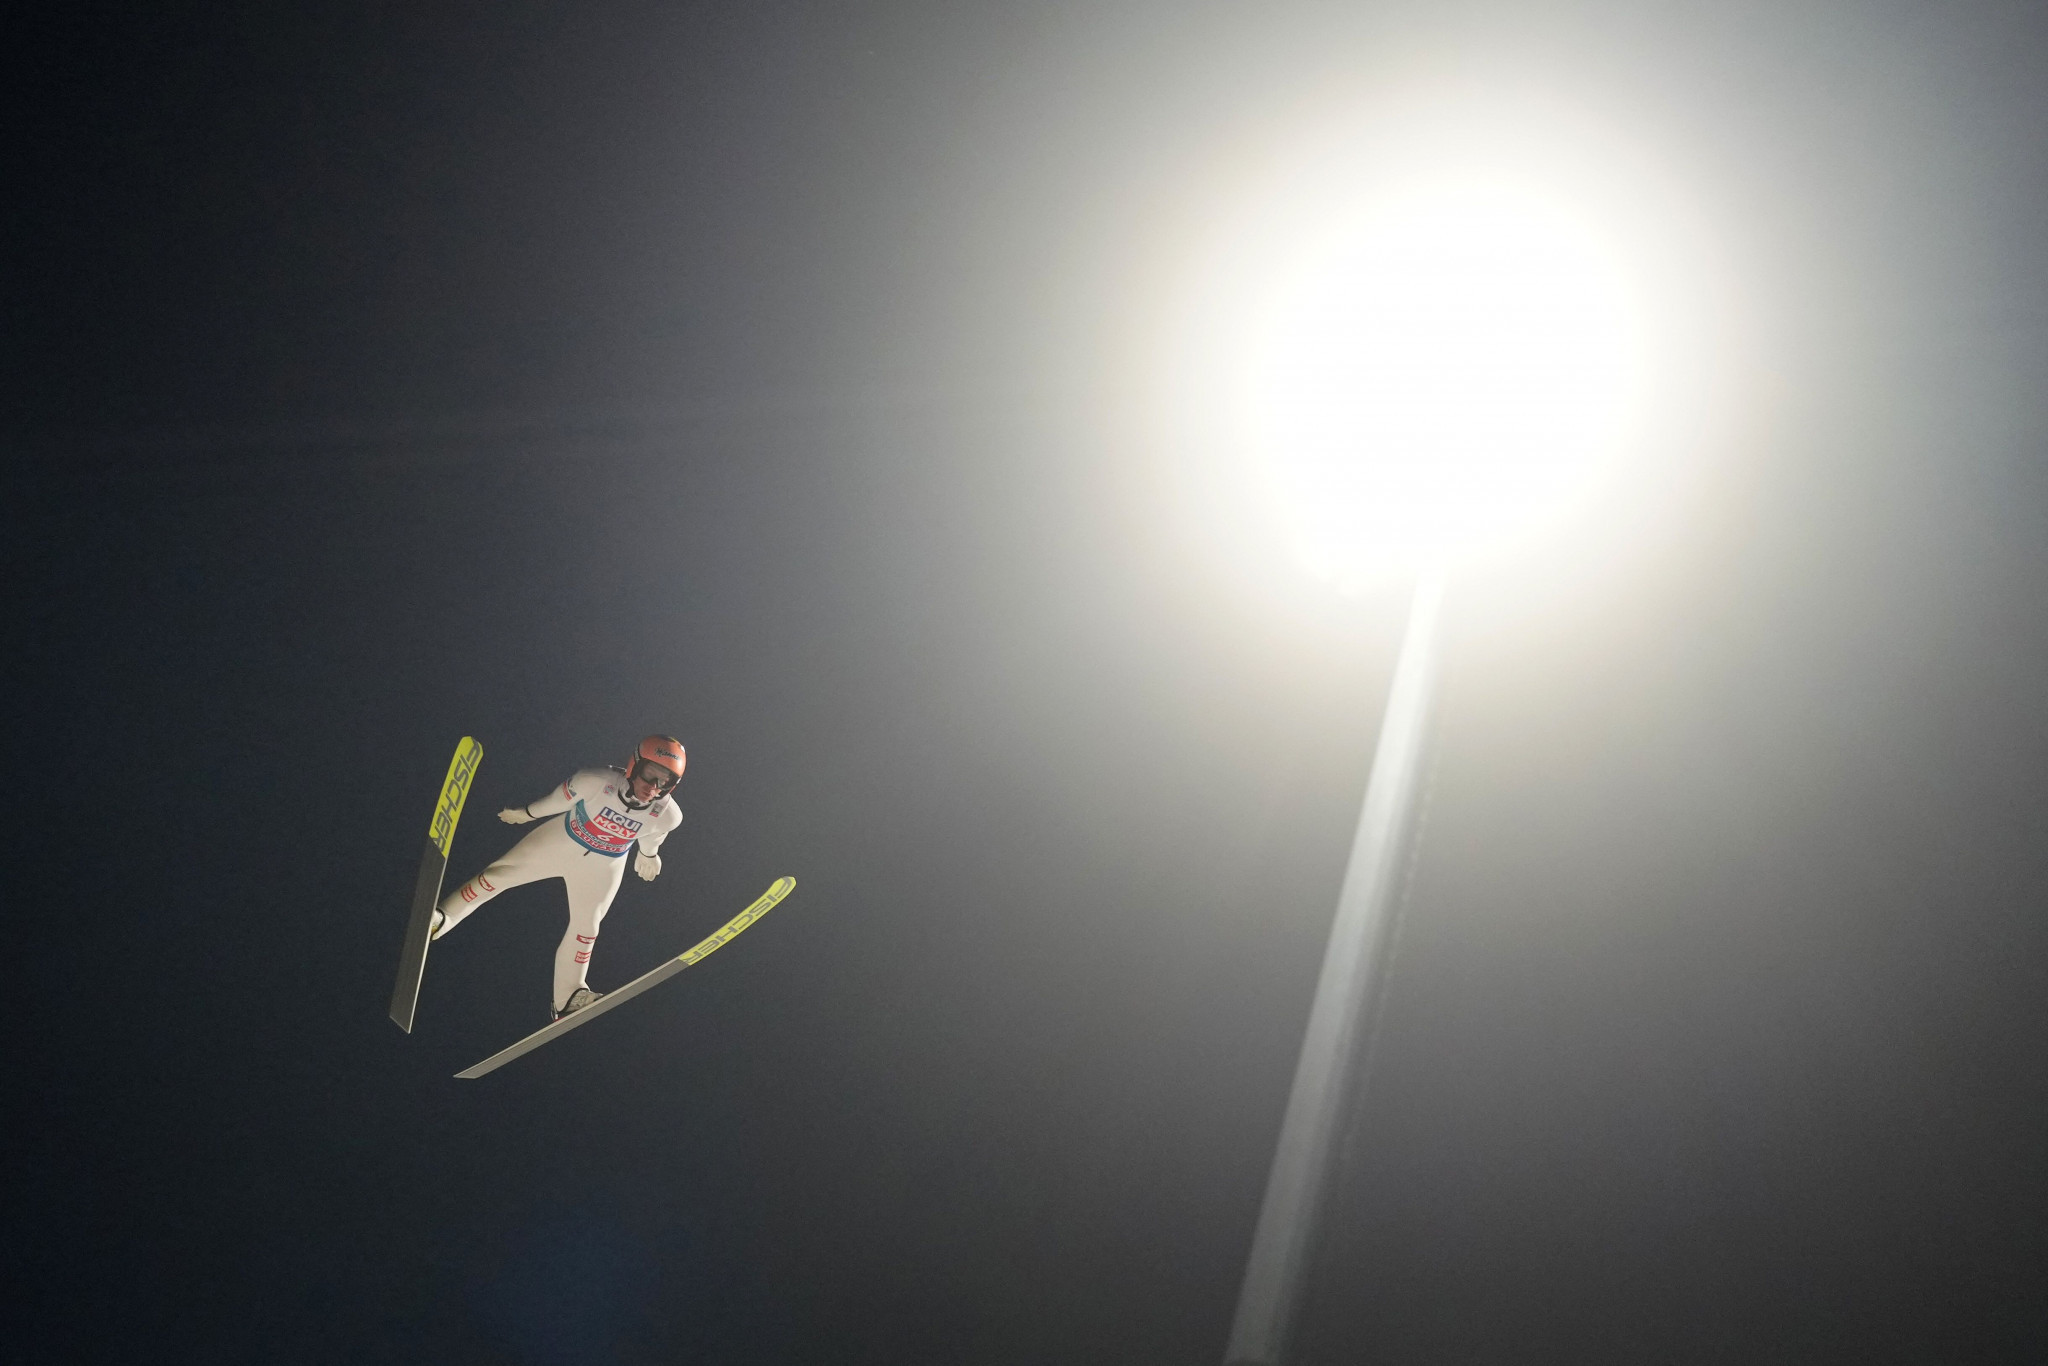 Austria edge out Poland to win first men's team event of Ski Jumping World Cup season